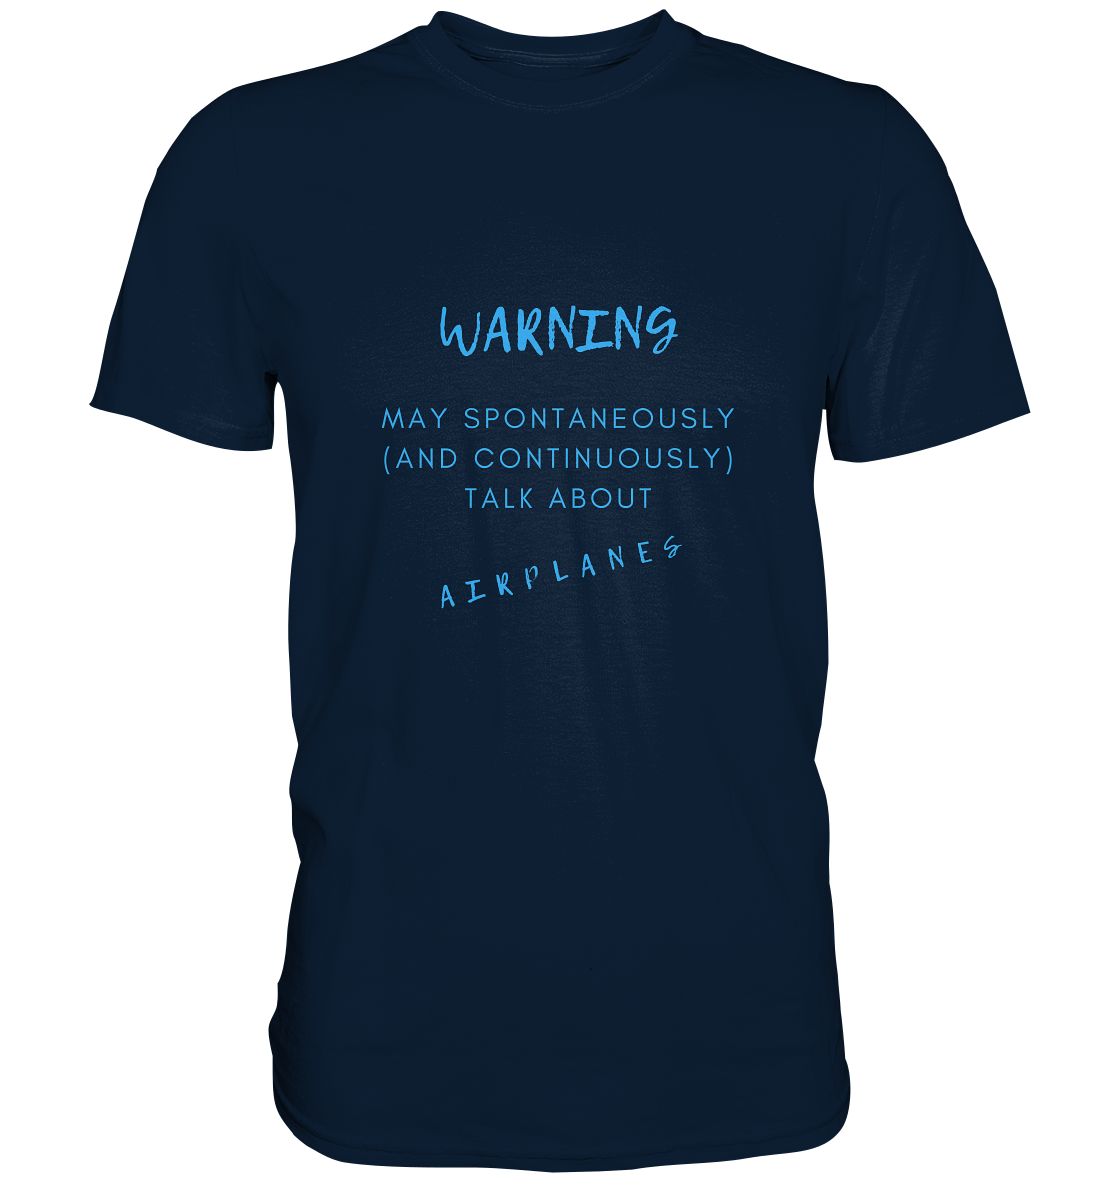 T-Shirt, Herren, men, mit Spruch, with quote "Warning, may continuously talk about airplanes" blau, blue